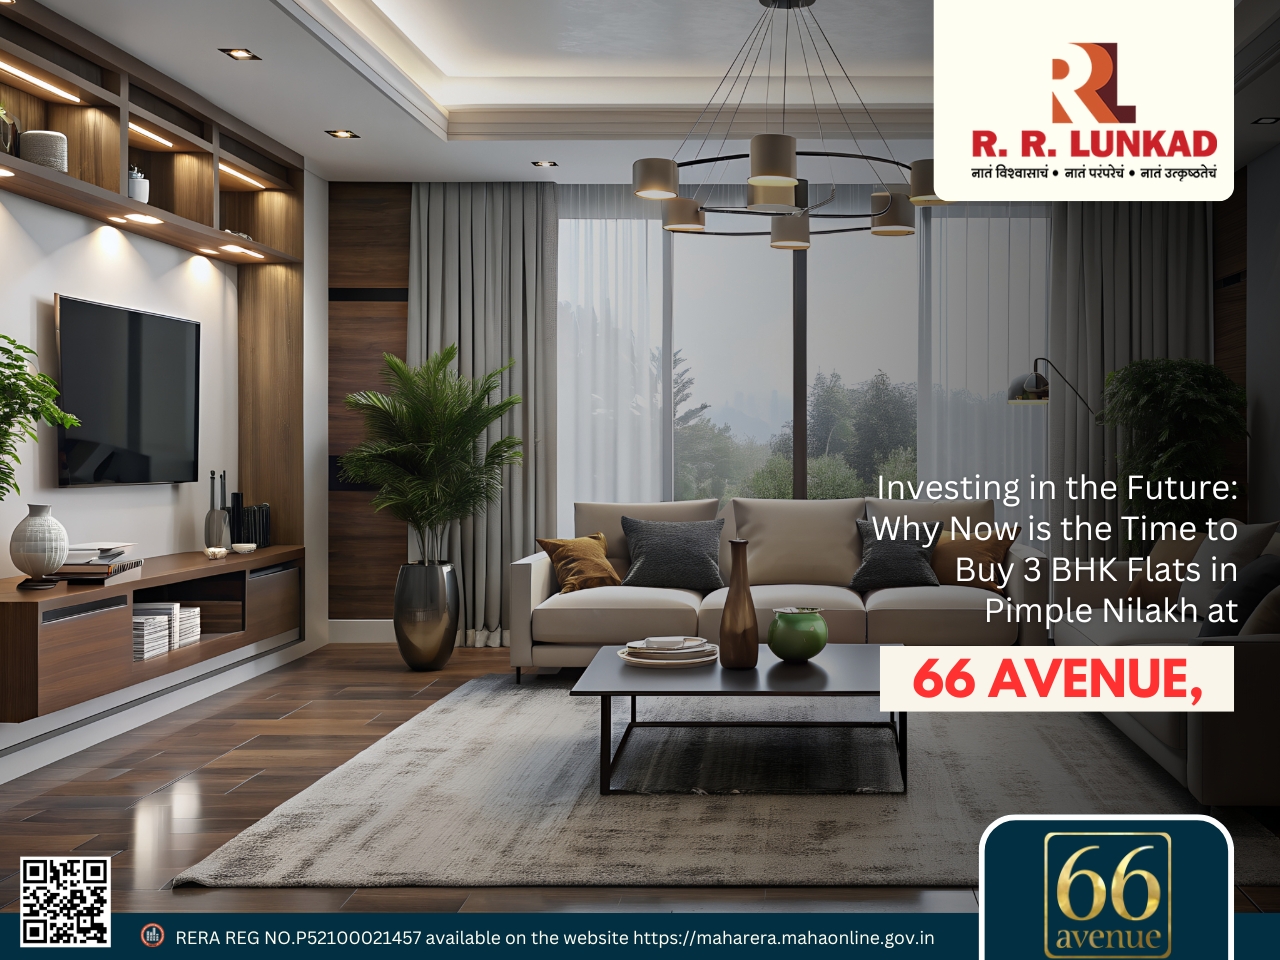 3 BHK Flats in Pimple Nilakh at 66 Avenue